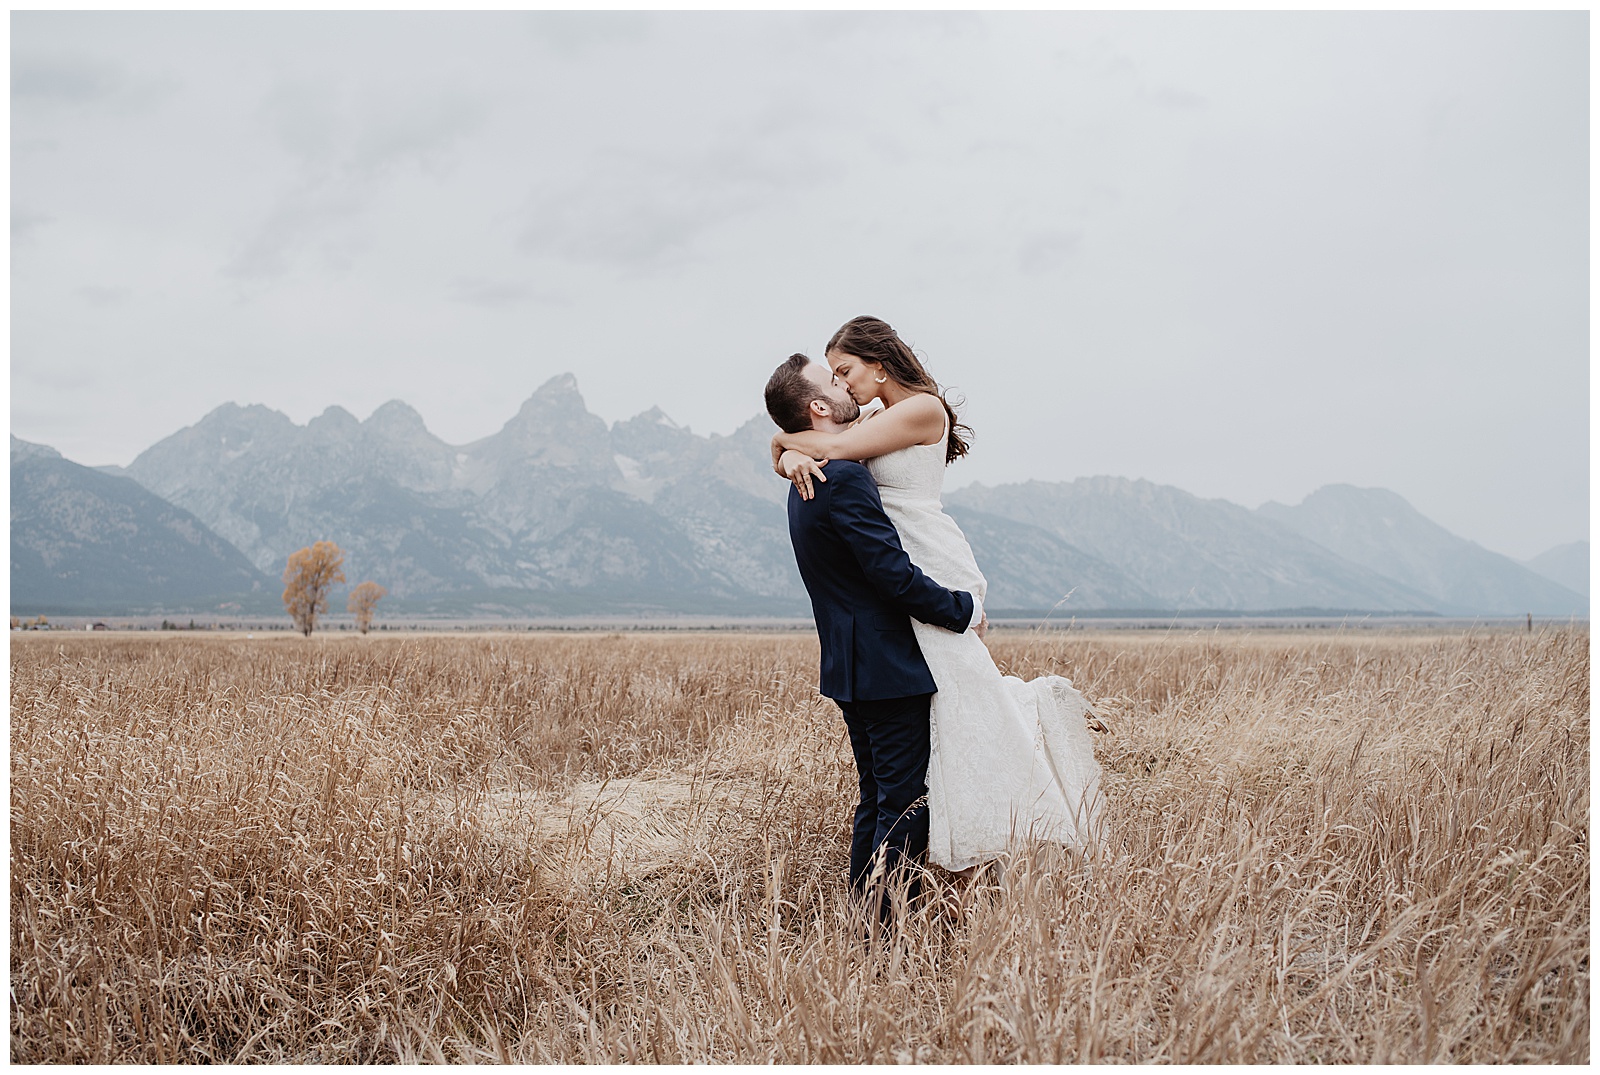 Grassy field wedding photos with the Teton mountains in the background